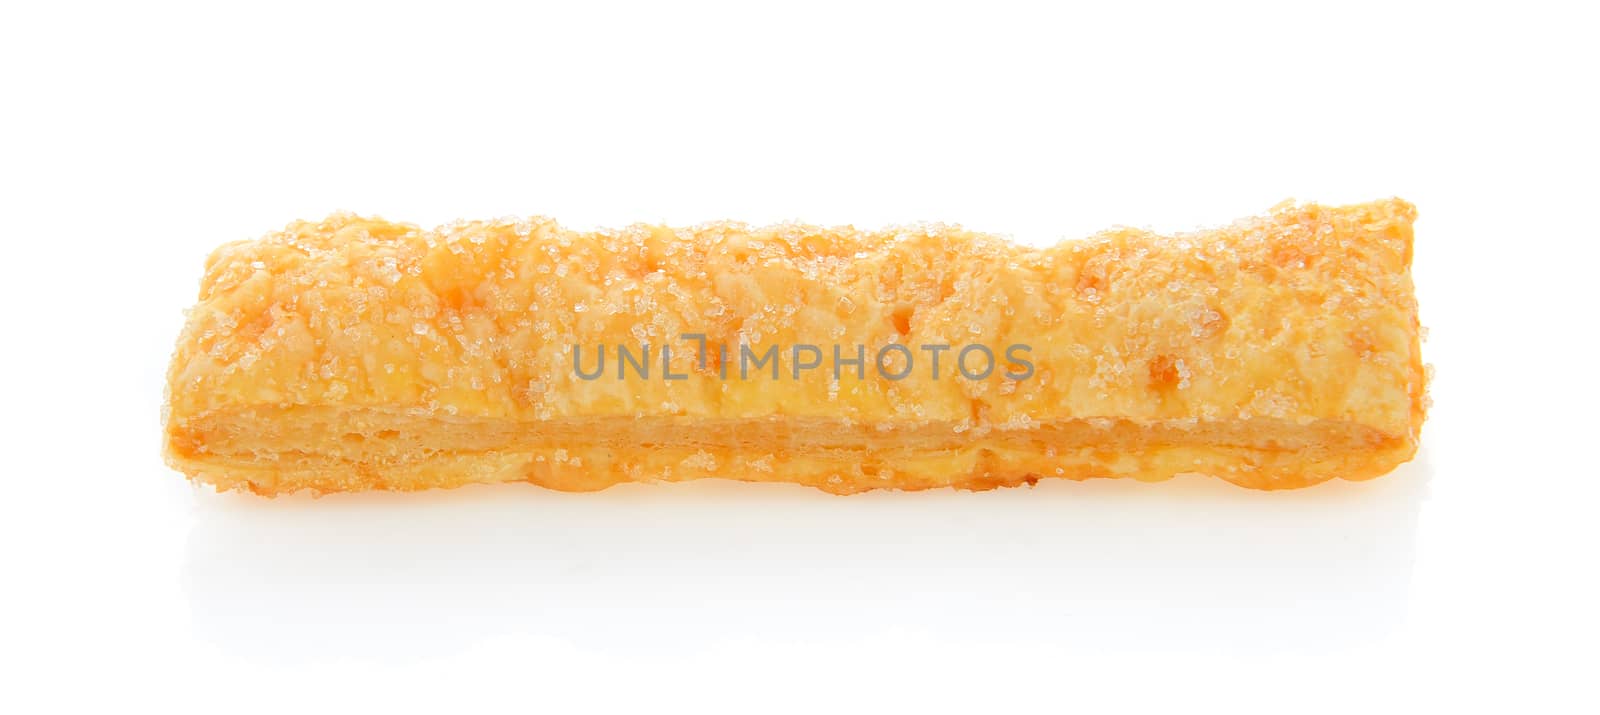 Pie or bread Sticks on white background by sommai